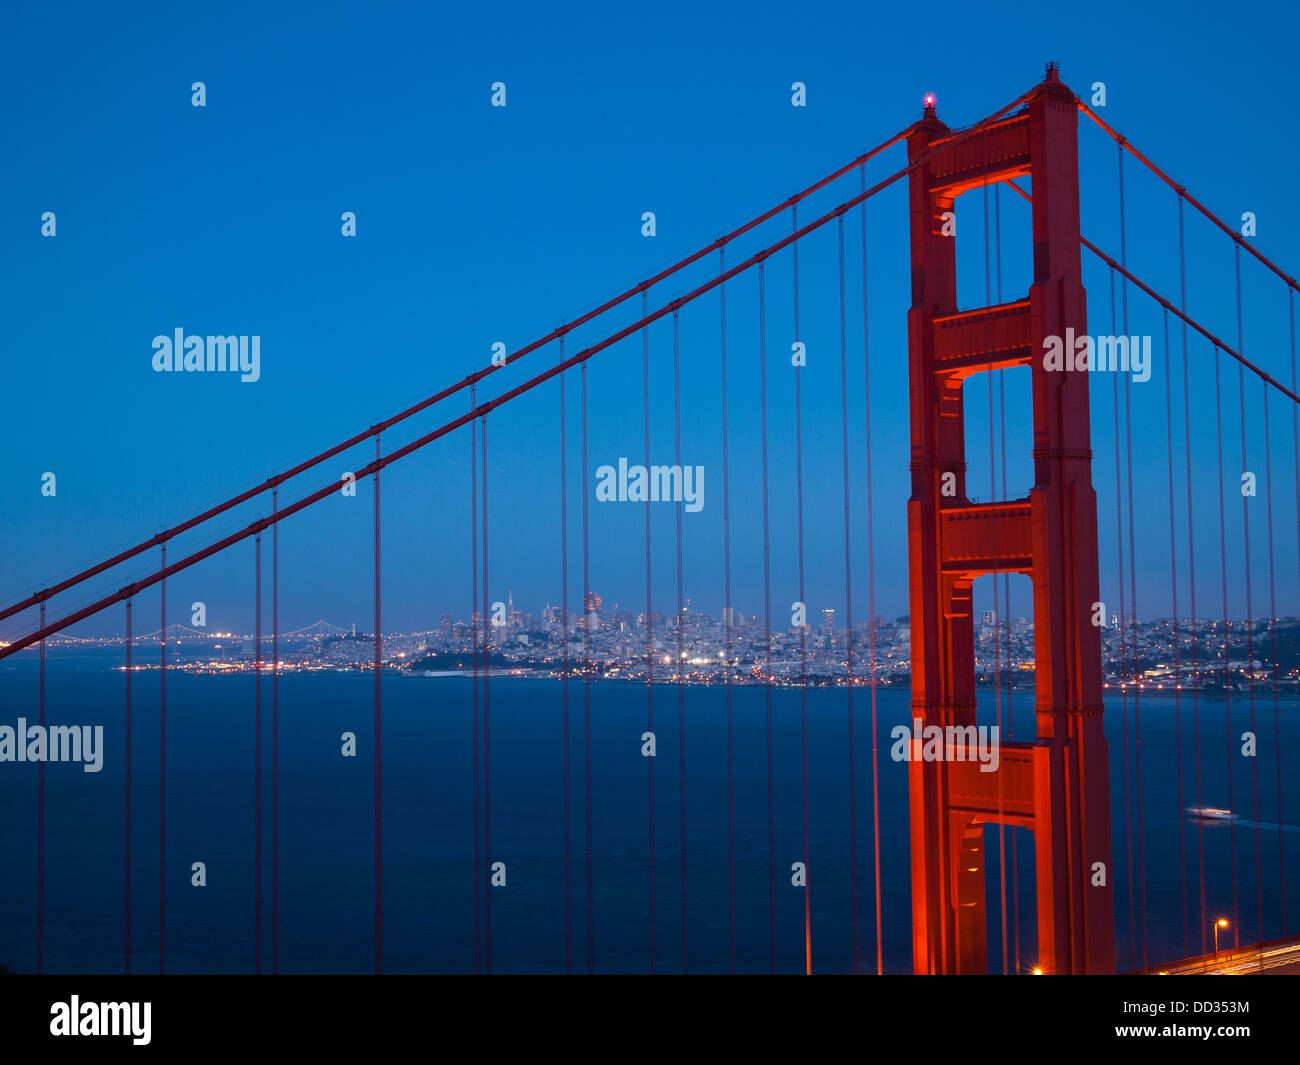 A spectacular view of the Golden Gate Bridge at blue hour, with the illuminated skyline of San Francisco in the background. Stock Photo